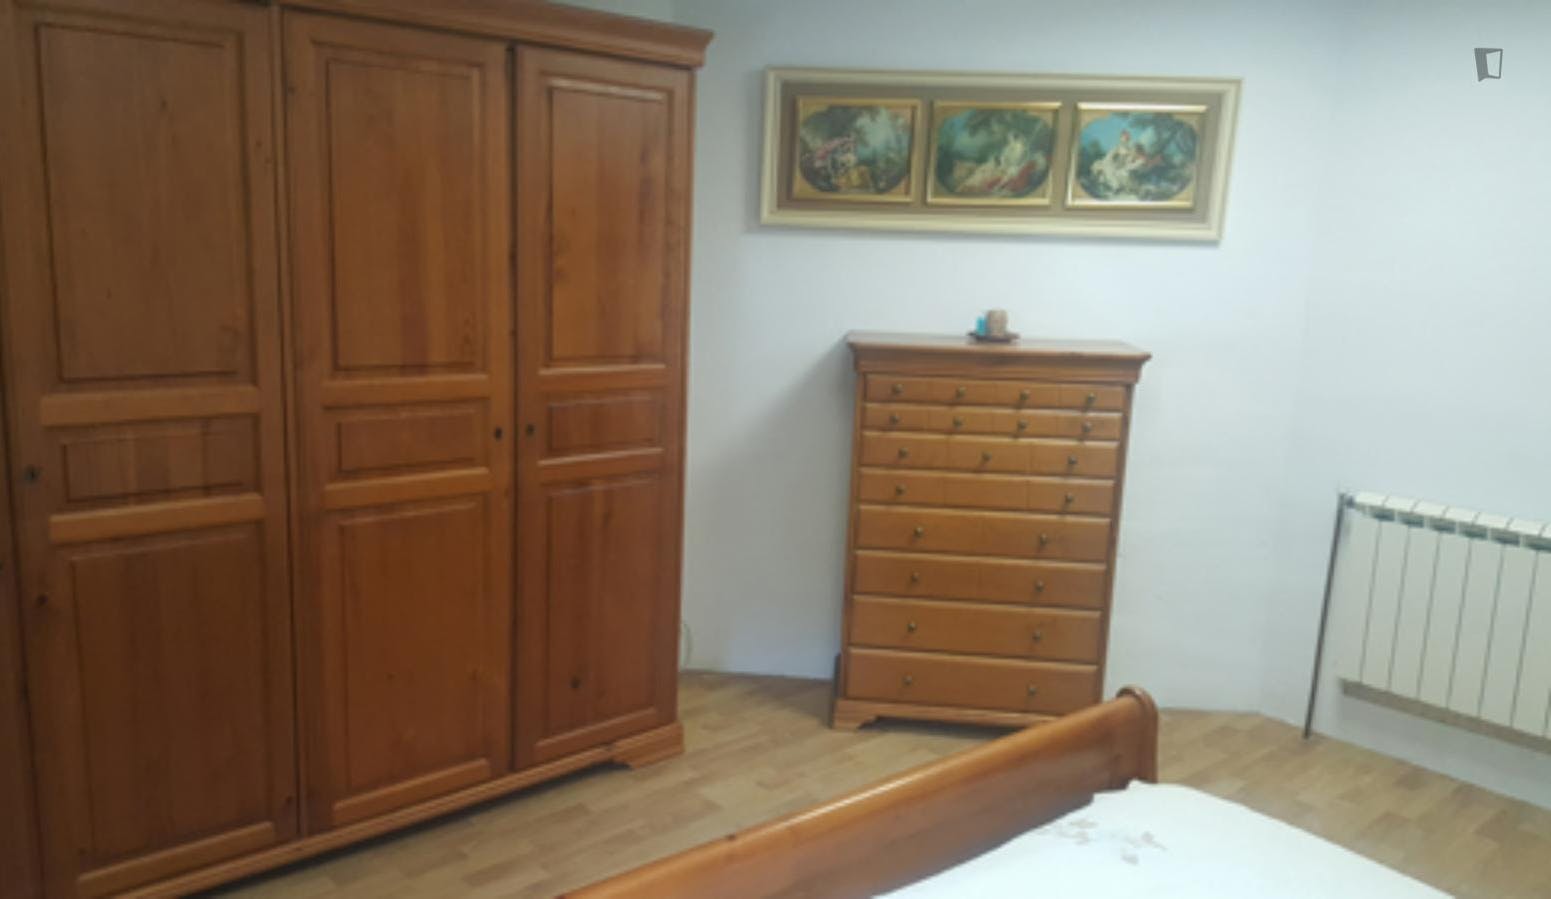 Homely double bedroom in a country house, in Uribarri-Kuartango